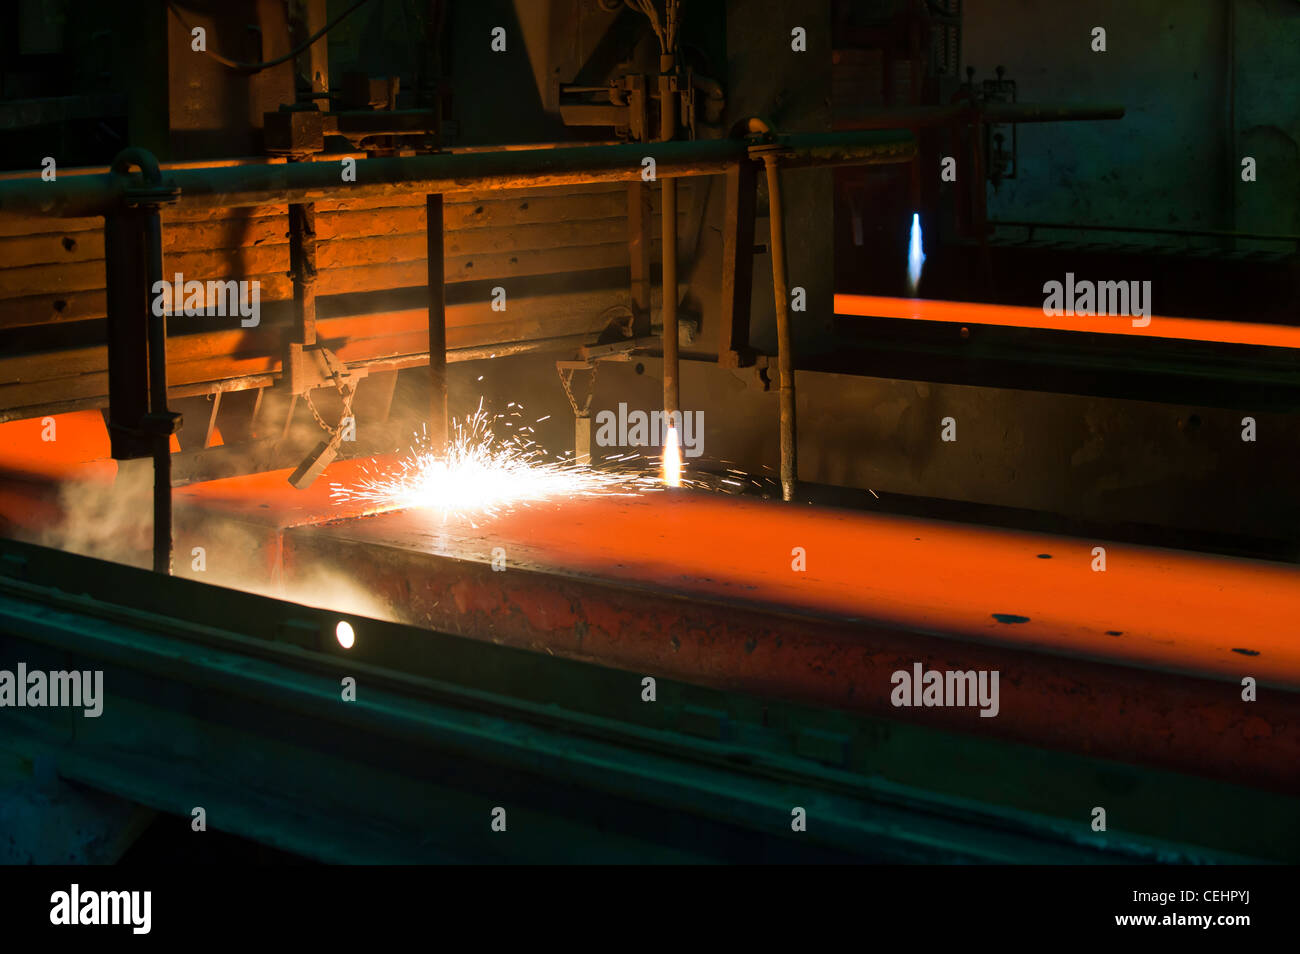 Heat Steel Welding acetylene Construction Cutting Factory Fire Flame Foundry Gas Natural Gas Industry Iron Stock Photo